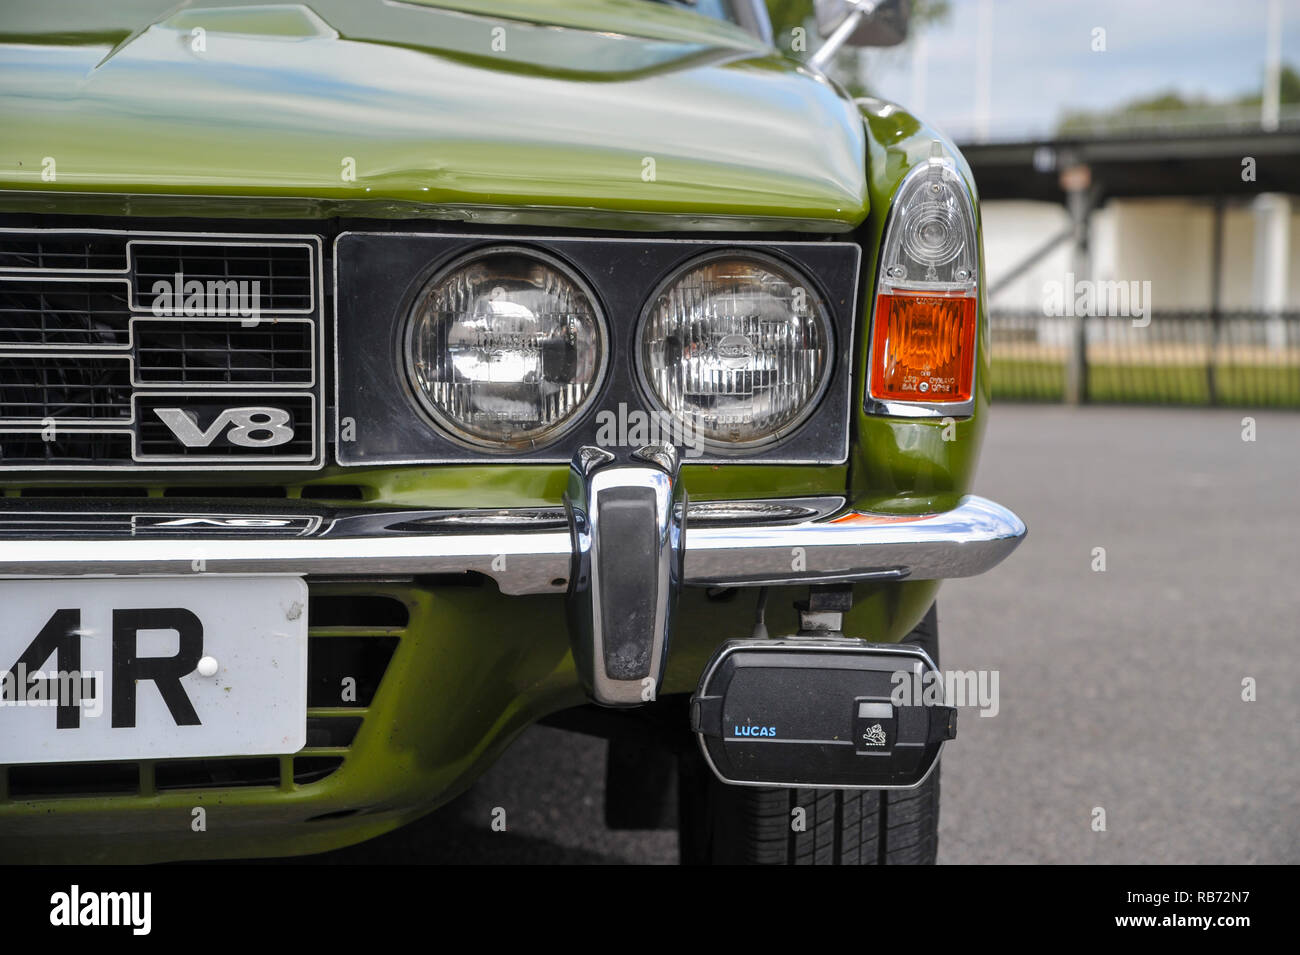 1976 Rover 3500S - manual gearbox V8 Rover P6 registered in 1977 after the end of production Stock Photo